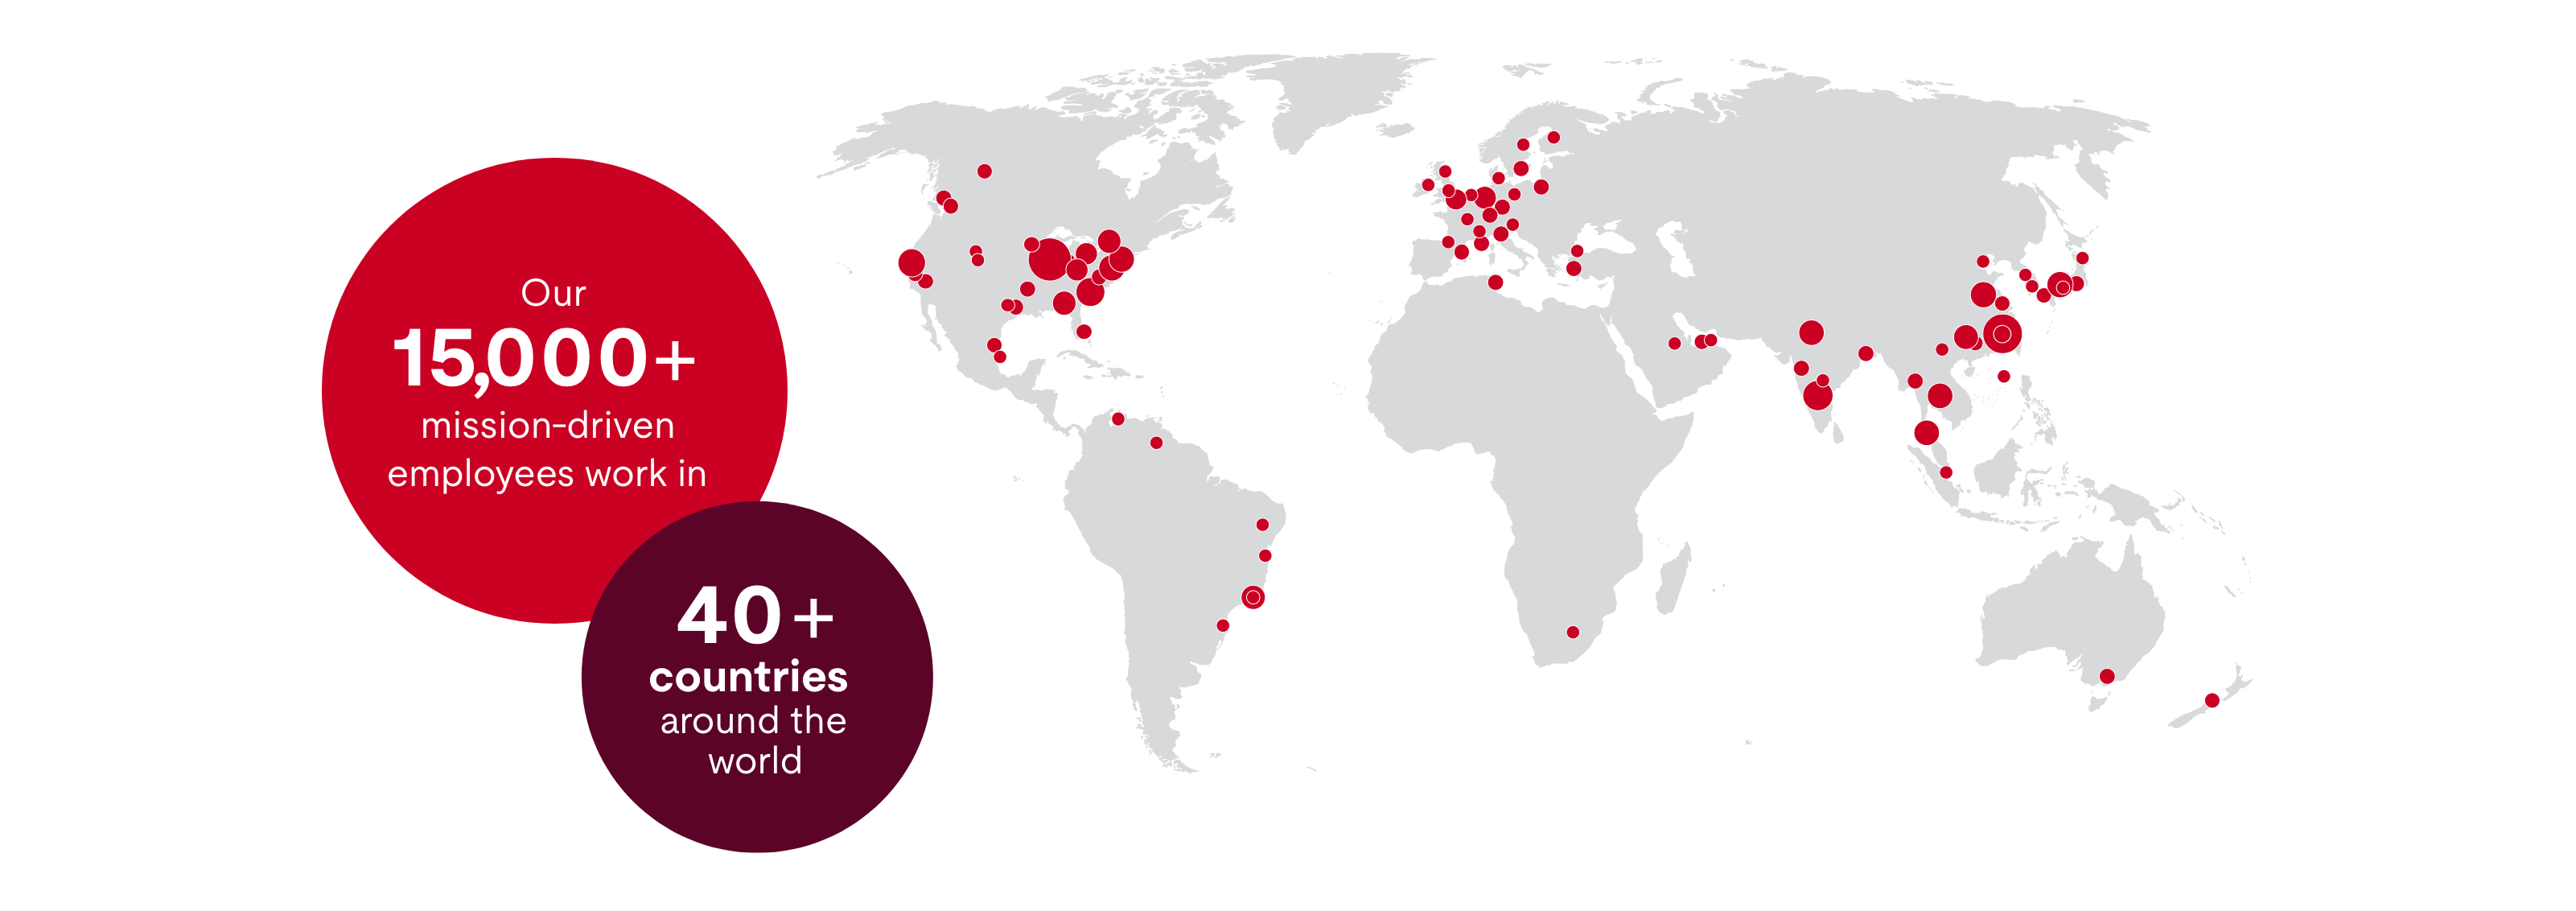 World map showing 15,000+ employees